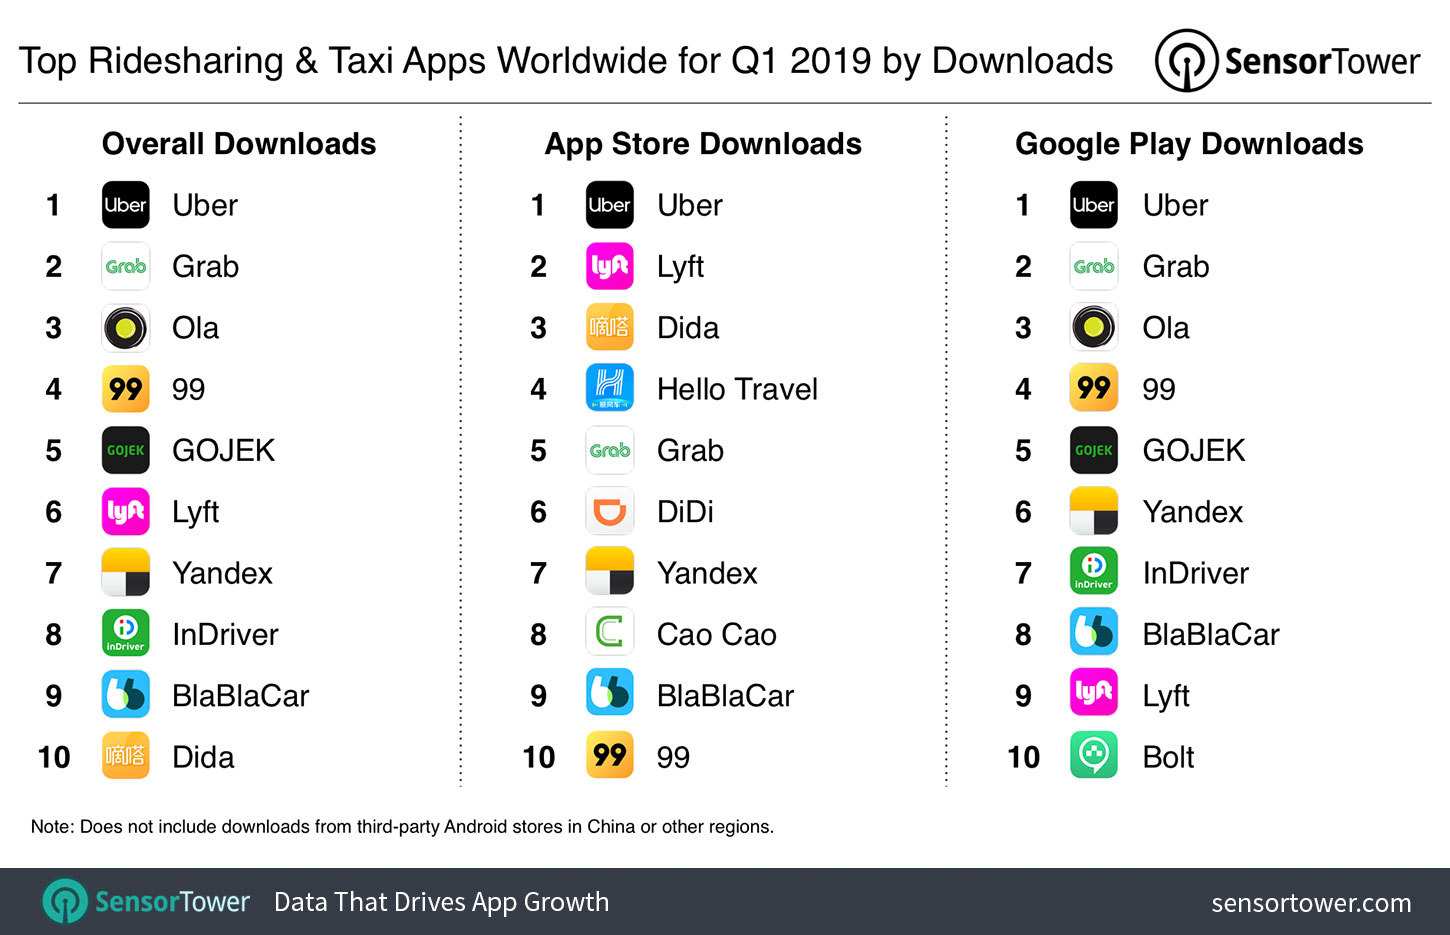 Top Ridesharing & Taxi Apps Worldwide Q1 2019 by Downloads Chart